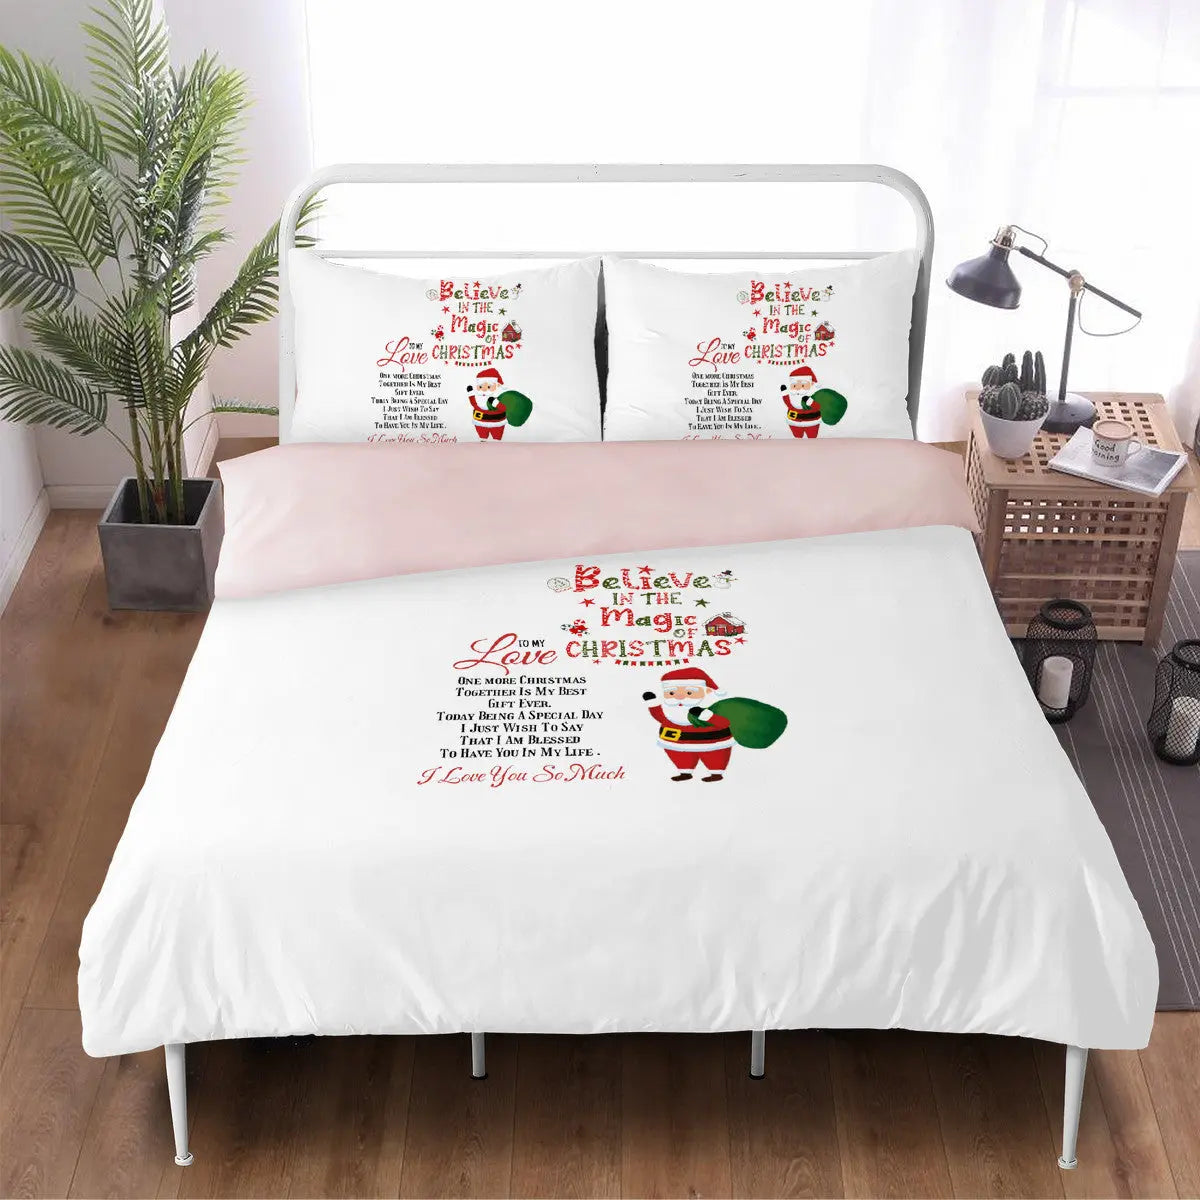 Bedding Believe in magic of Christmas Home-clothes-jewelry